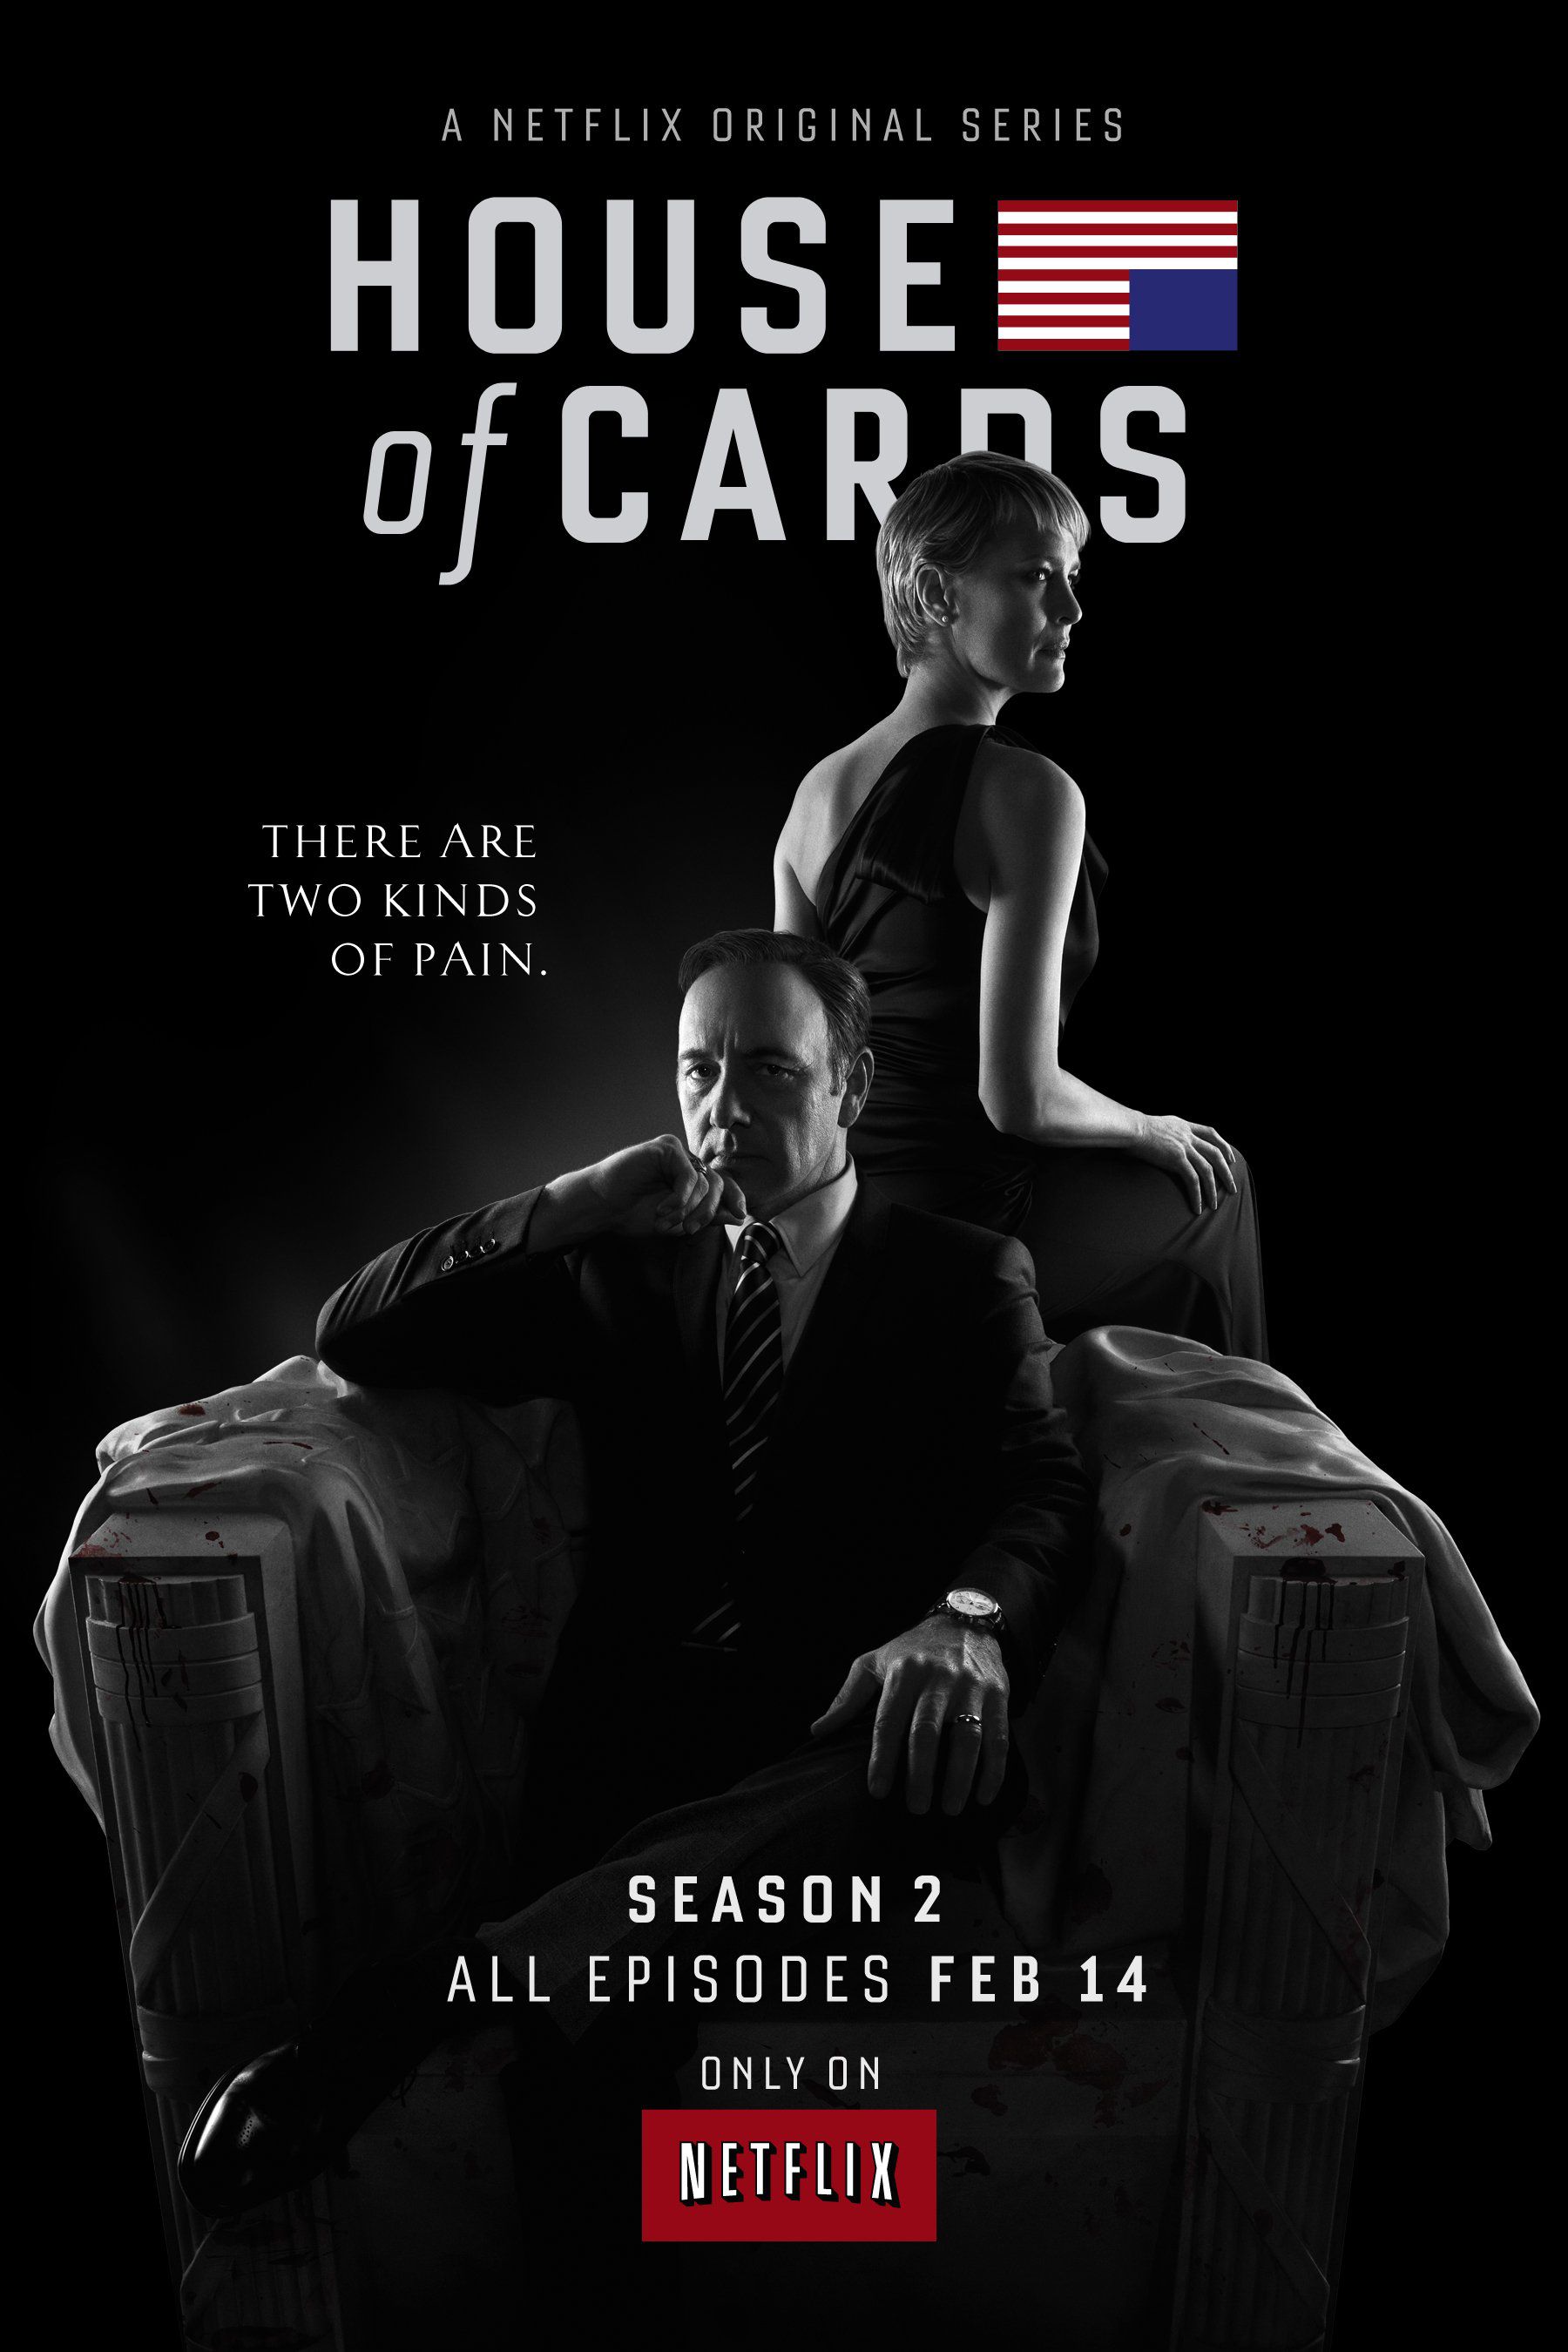 House of Cards - Série (2013) streaming VF gratuit complet